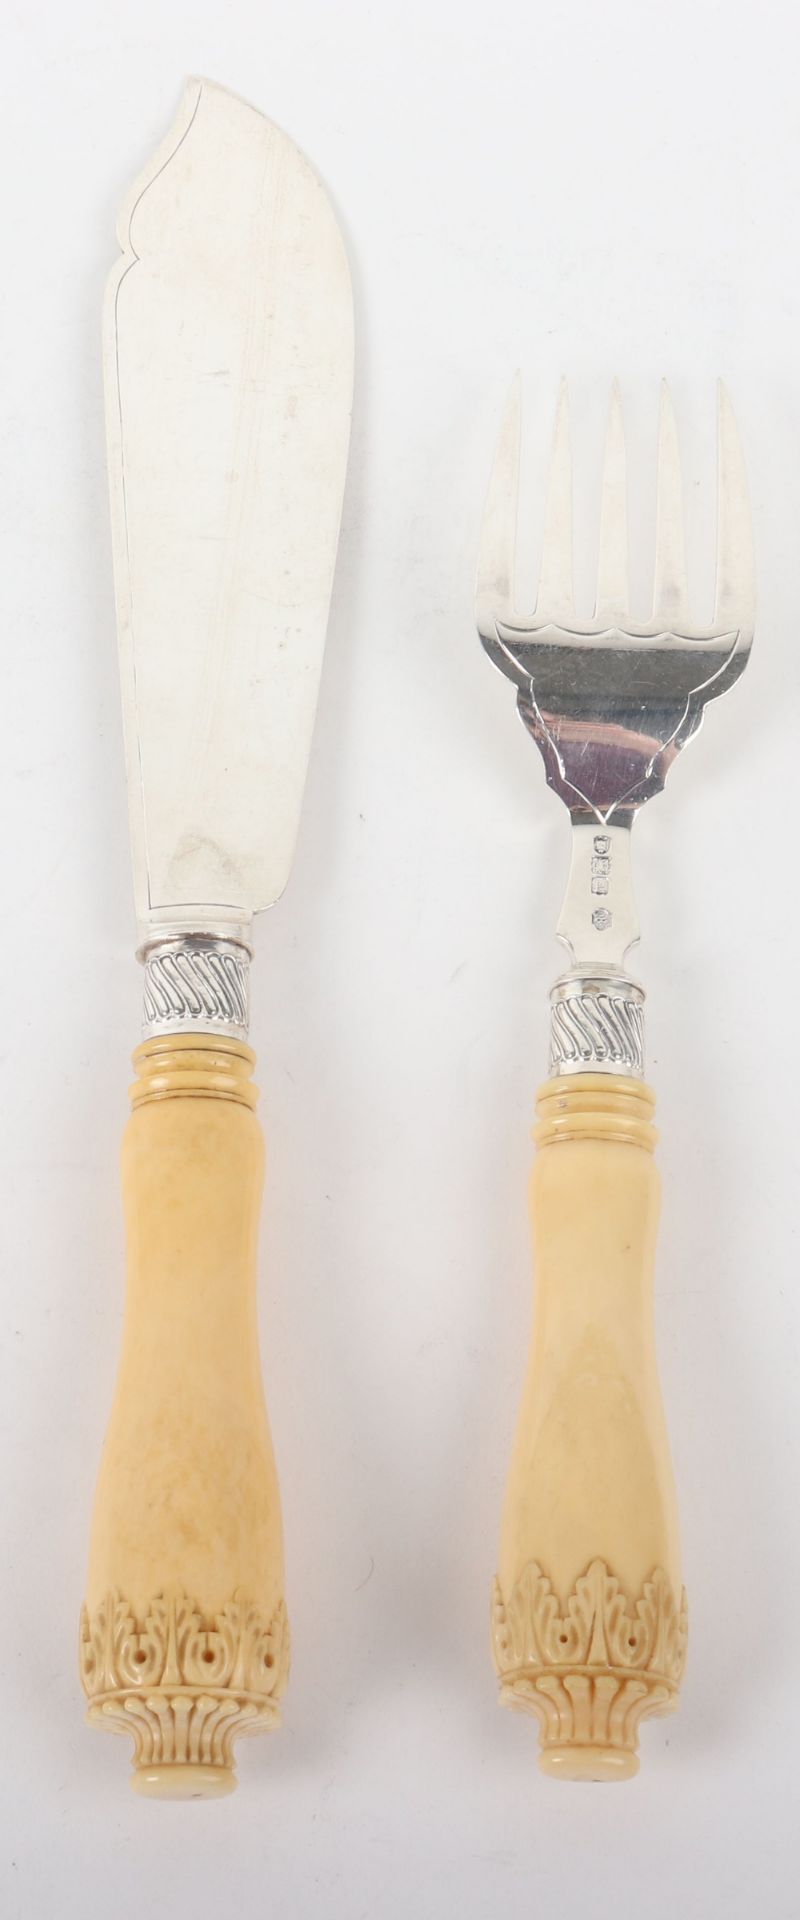 A pair of silver and carved ivory fish servers, William Hutton & Sons, London 1900 - Image 2 of 7